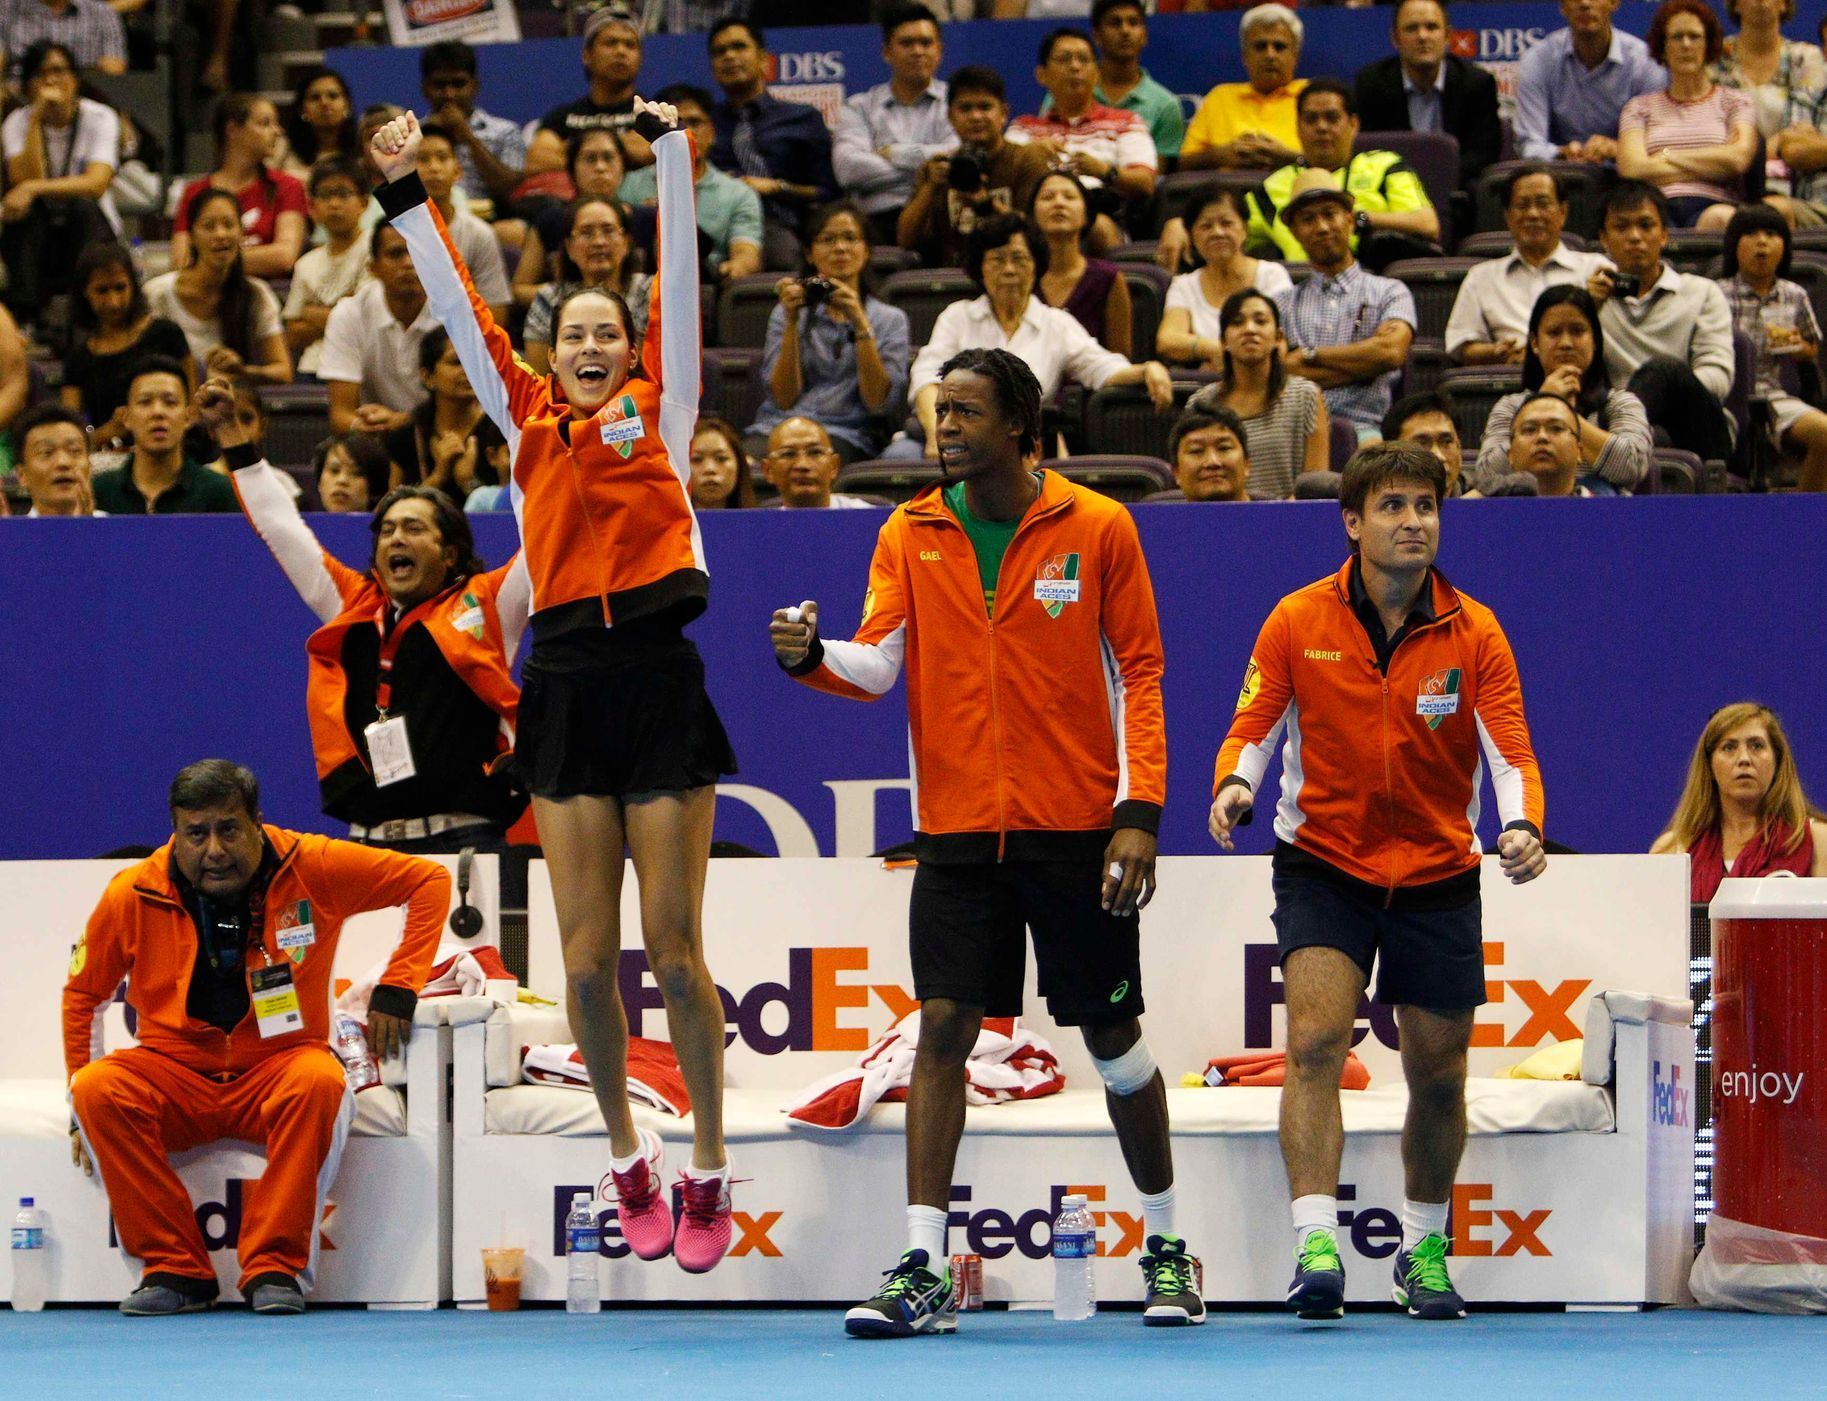 Team Micromax Indian Aces' Ivanovic of Serbia, Gael Monfils of France and Santoro of France react courtside during their mixed doubles match at the International Premier Tennis League (IPTL) in Singap